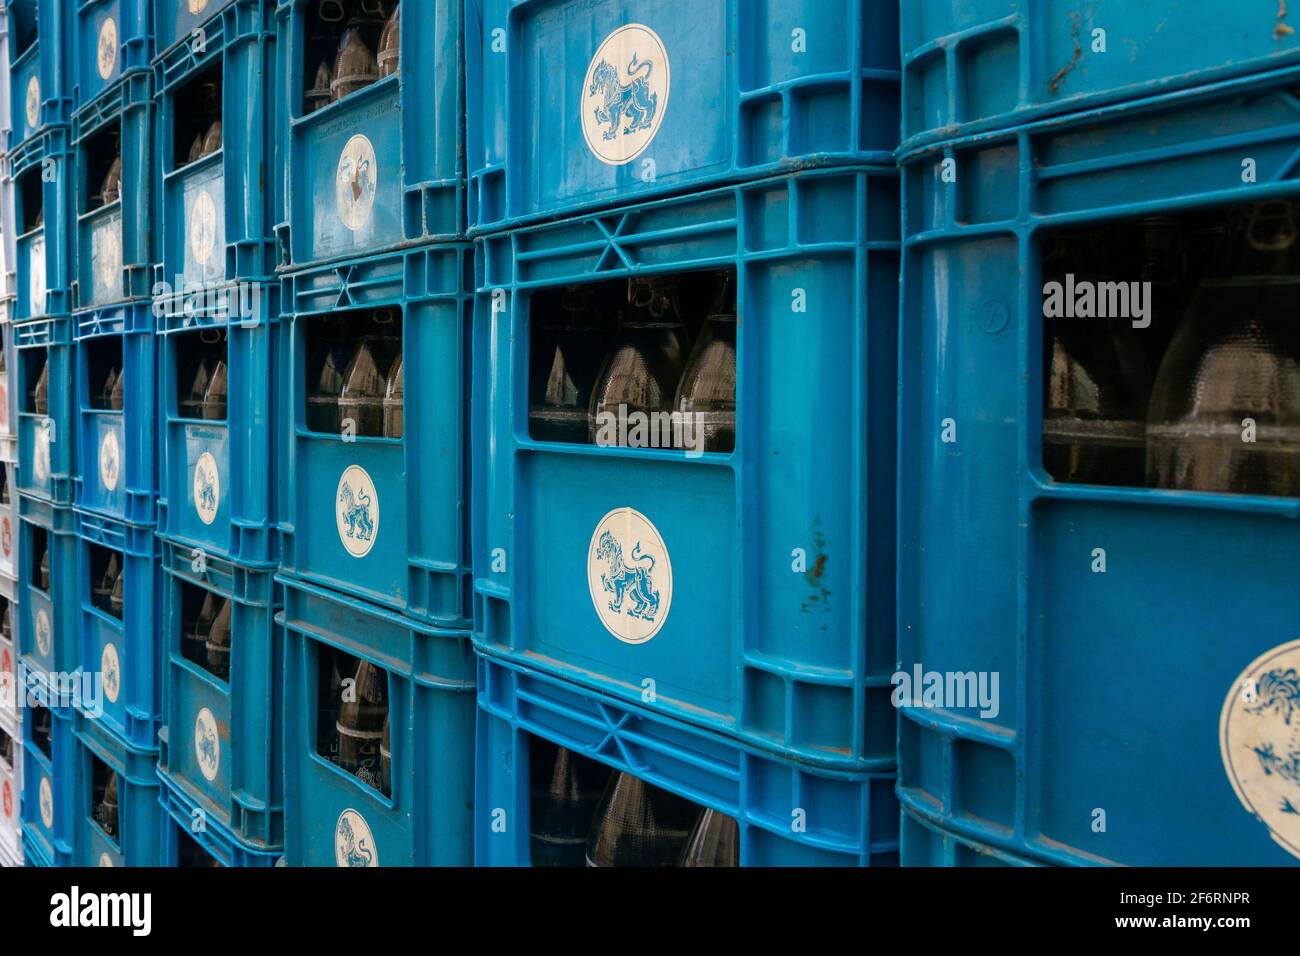 Bangkok, Thailand - July 16, 2016: Cases of beer in the back of a truck. Stock Photo